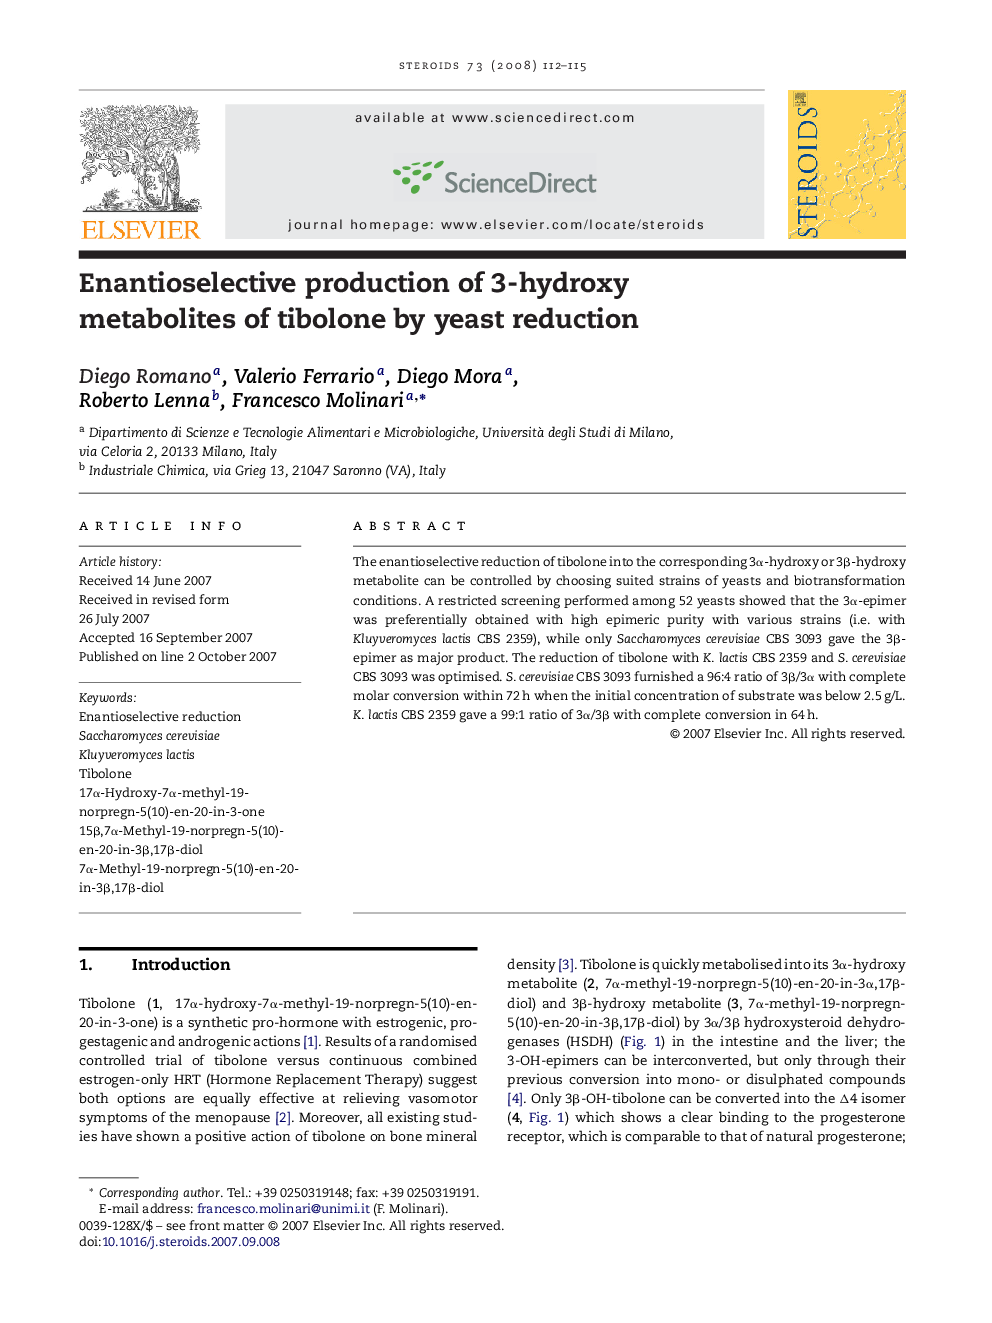 Enantioselective production of 3-hydroxy metabolites of tibolone by yeast reduction